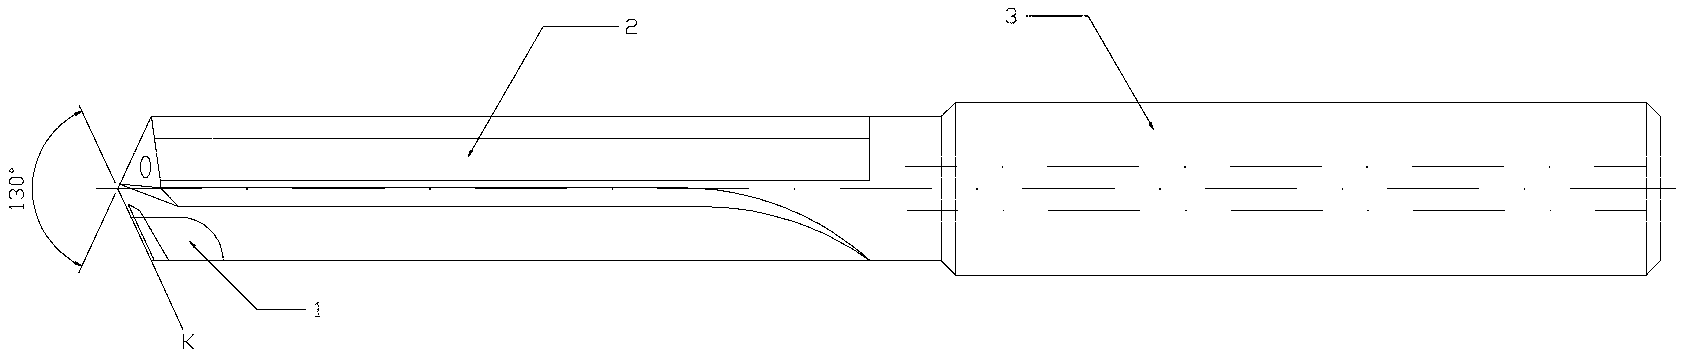 PCD (pitch circle diameter) drill bit with chip breaker groove